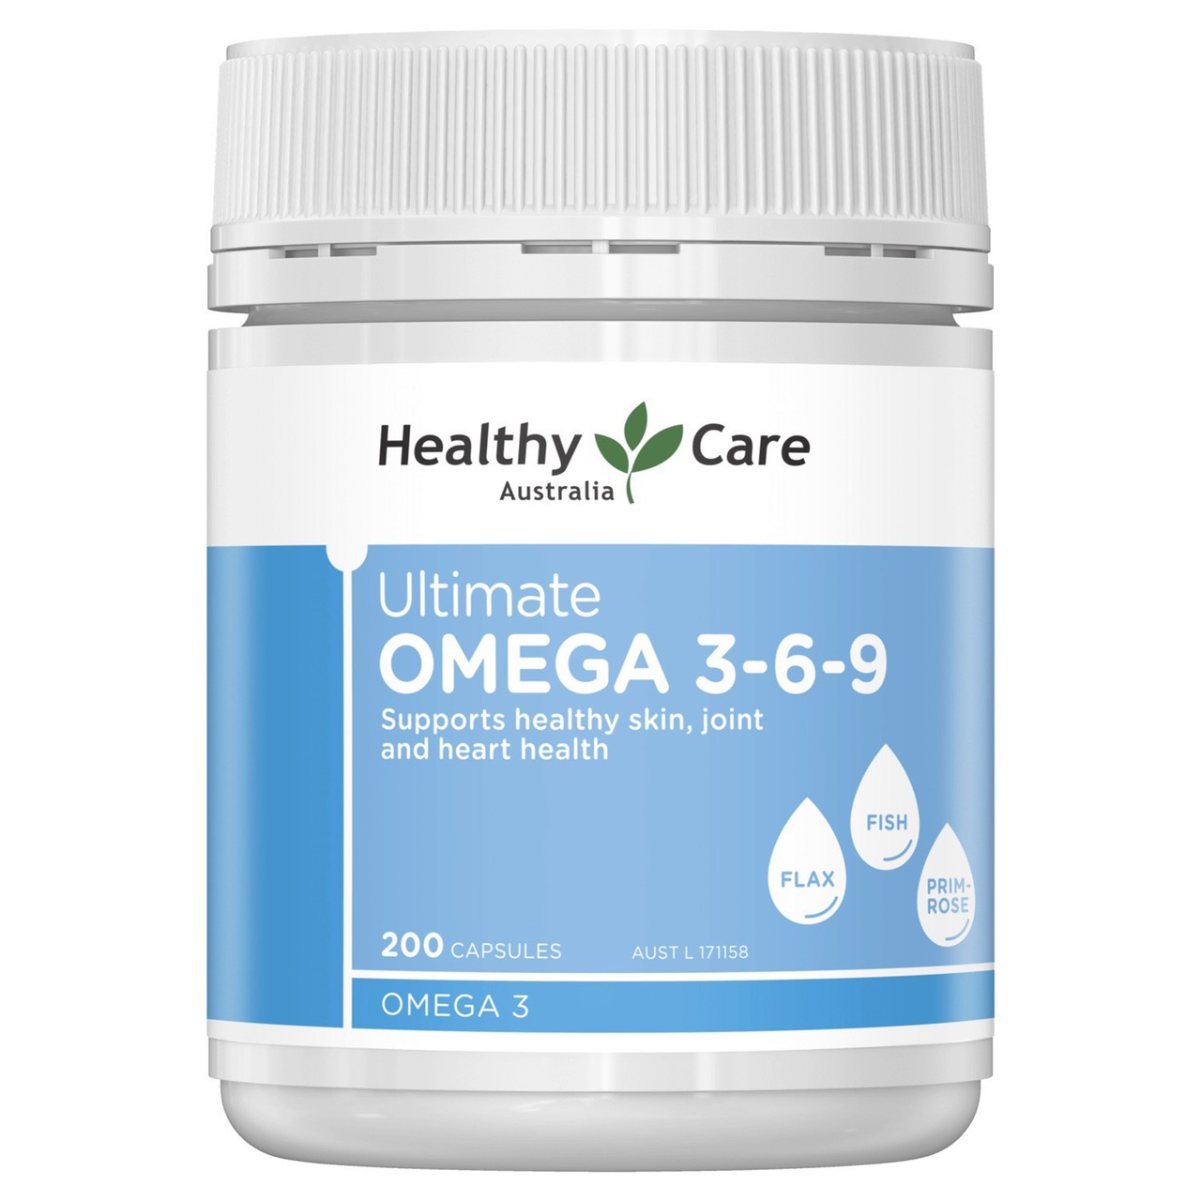 Omega 3-6-9 Healthy Care Ultimate